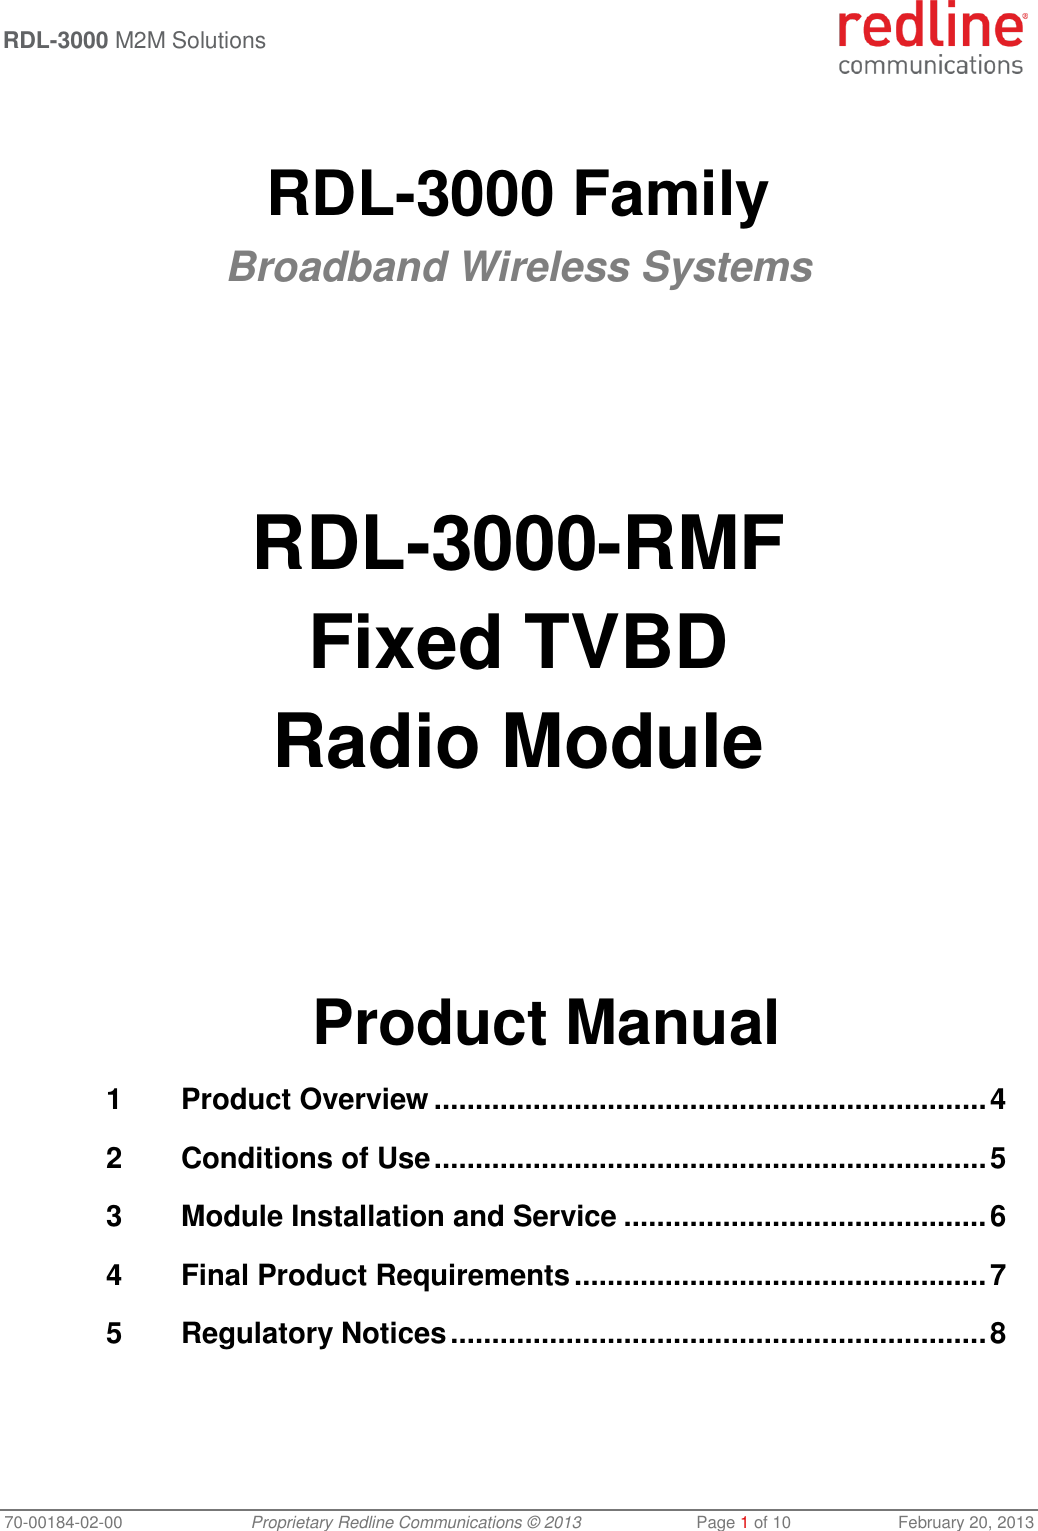  RDL-3000 M2M Solutions   70-00184-02-00 Proprietary Redline Communications © 2013  Page 1 of 10  February 20, 2013  RDL-3000 Family Broadband Wireless Systems       RDL-3000-RMF Fixed TVBD Radio Module       Product Manual 1 Product Overview ................................................................... 4 2 Conditions of Use ................................................................... 5 3 Module Installation and Service ............................................ 6 4 Final Product Requirements .................................................. 7 5 Regulatory Notices ................................................................. 8 